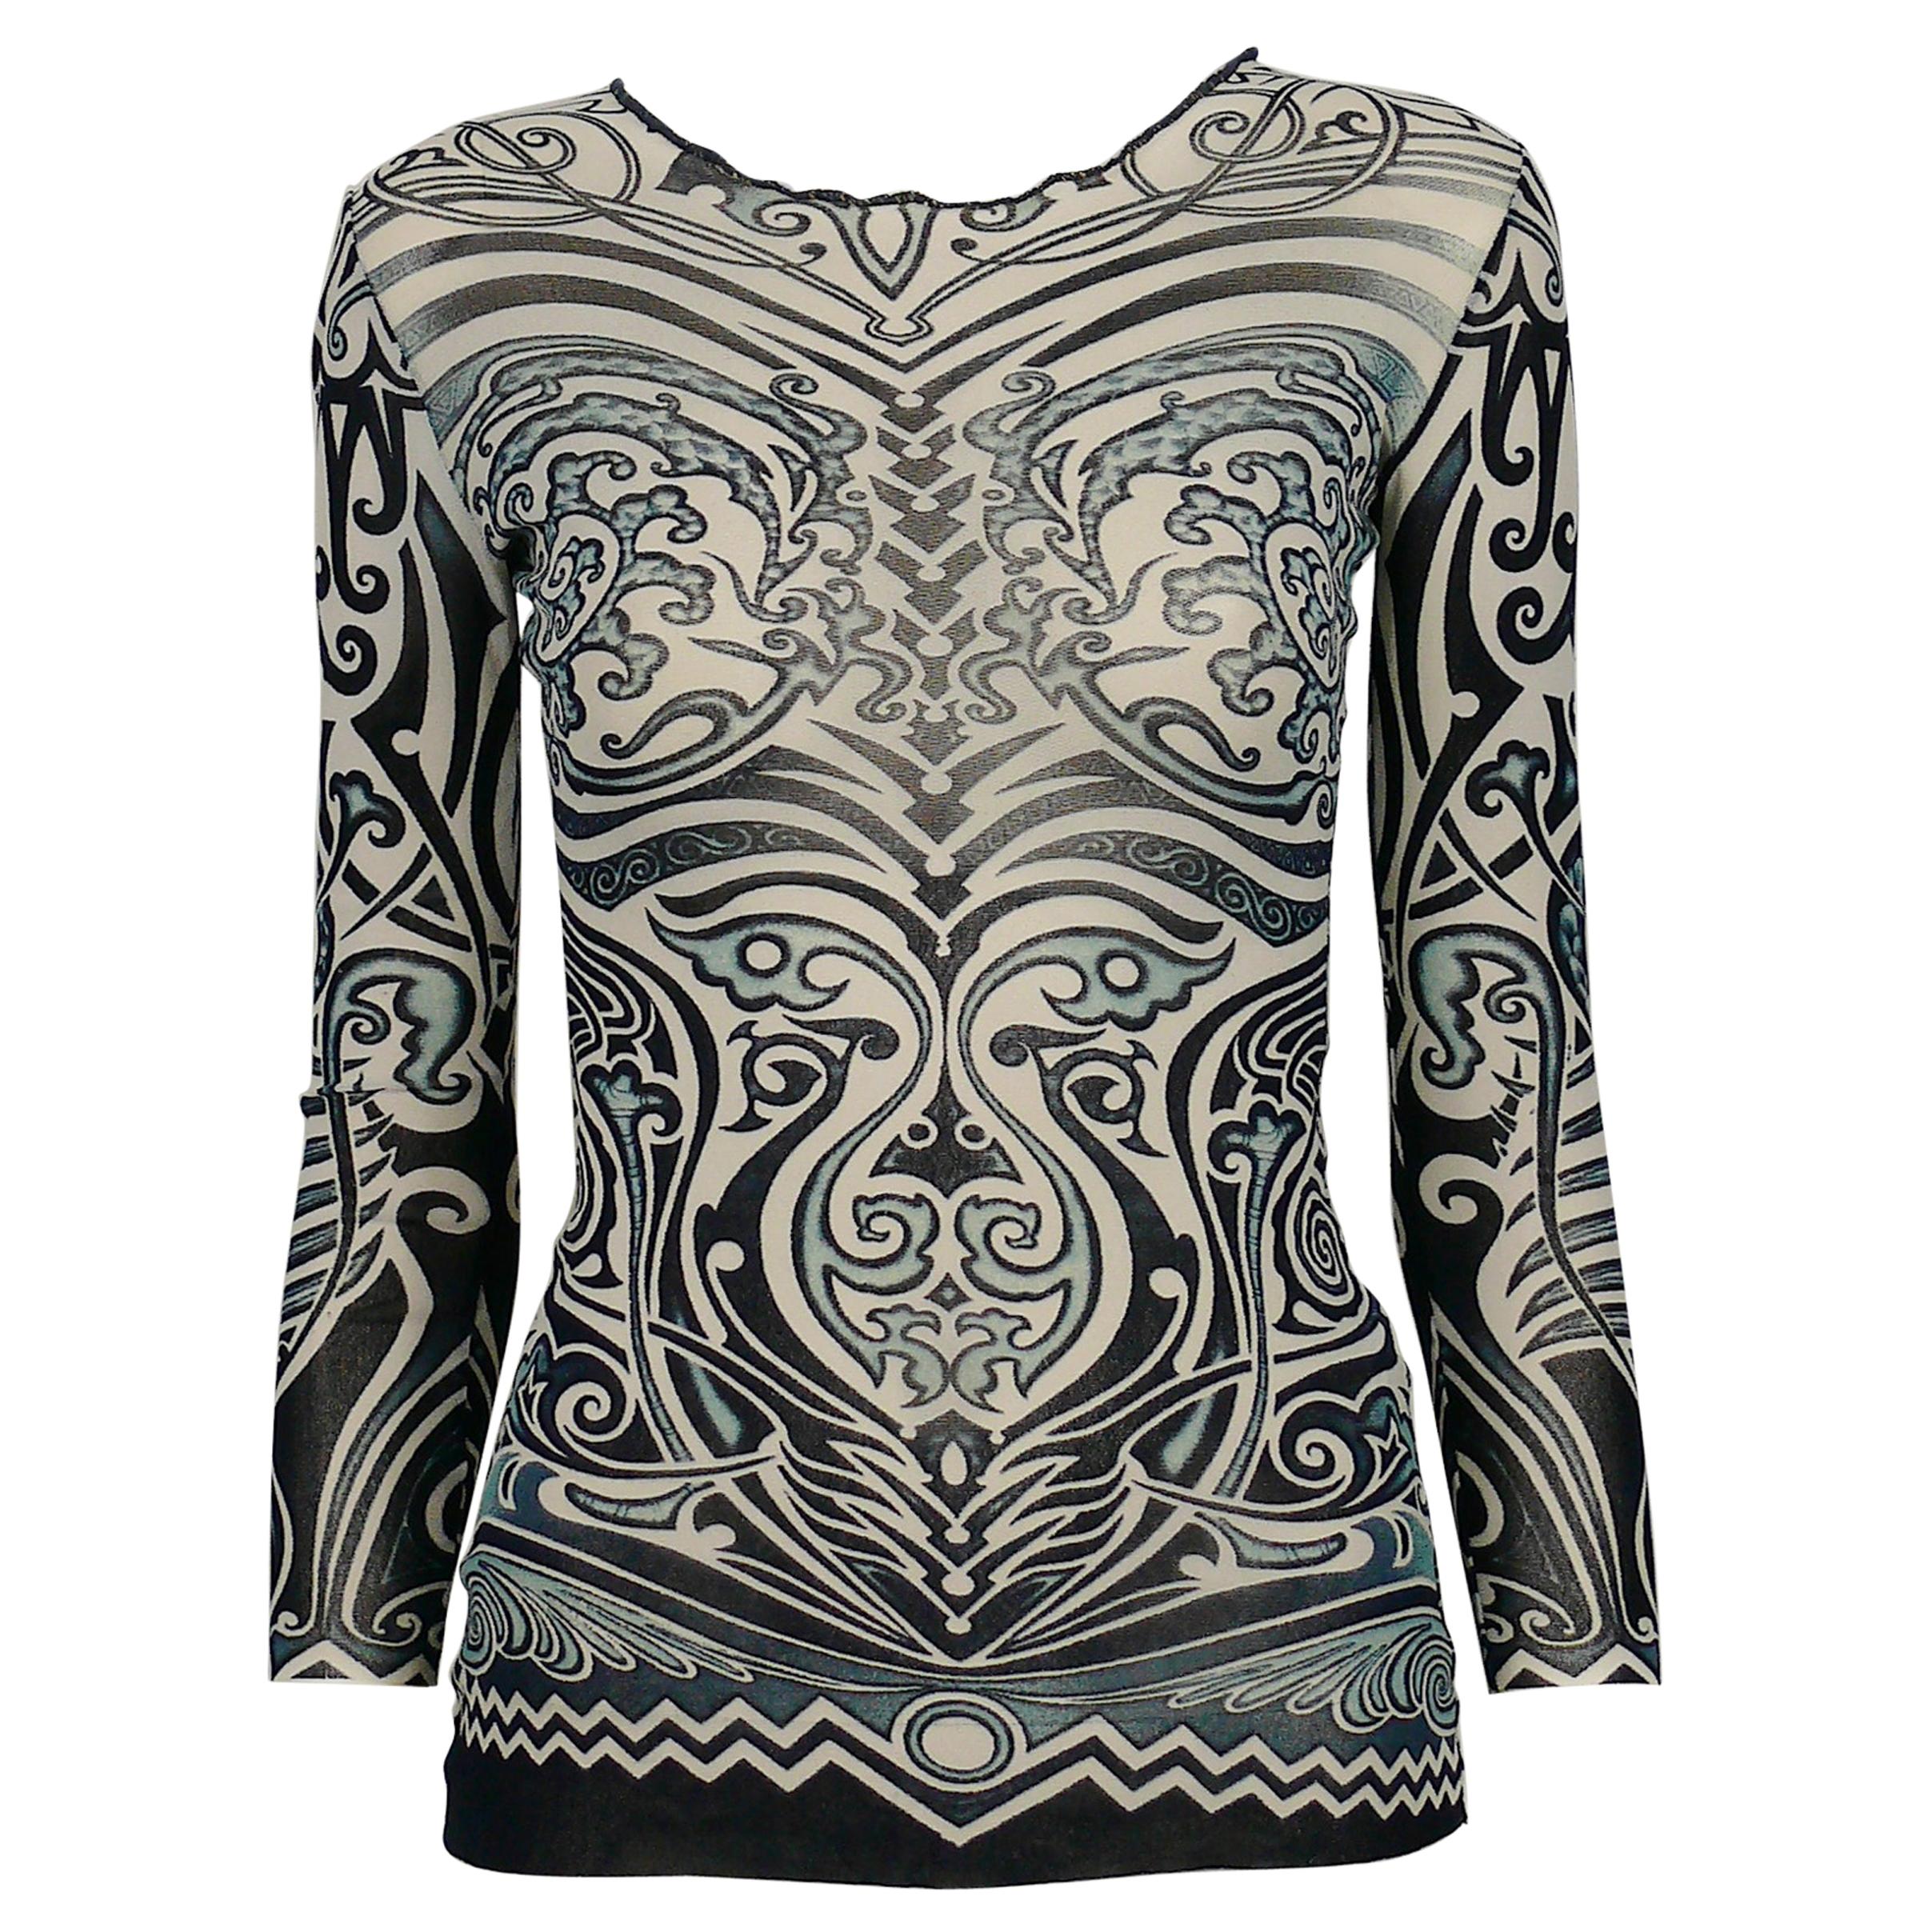 Jean Paul Gaultier Spring/Summer 1996 Iconic Tribal Tattoo Sheer Mesh Top Size S